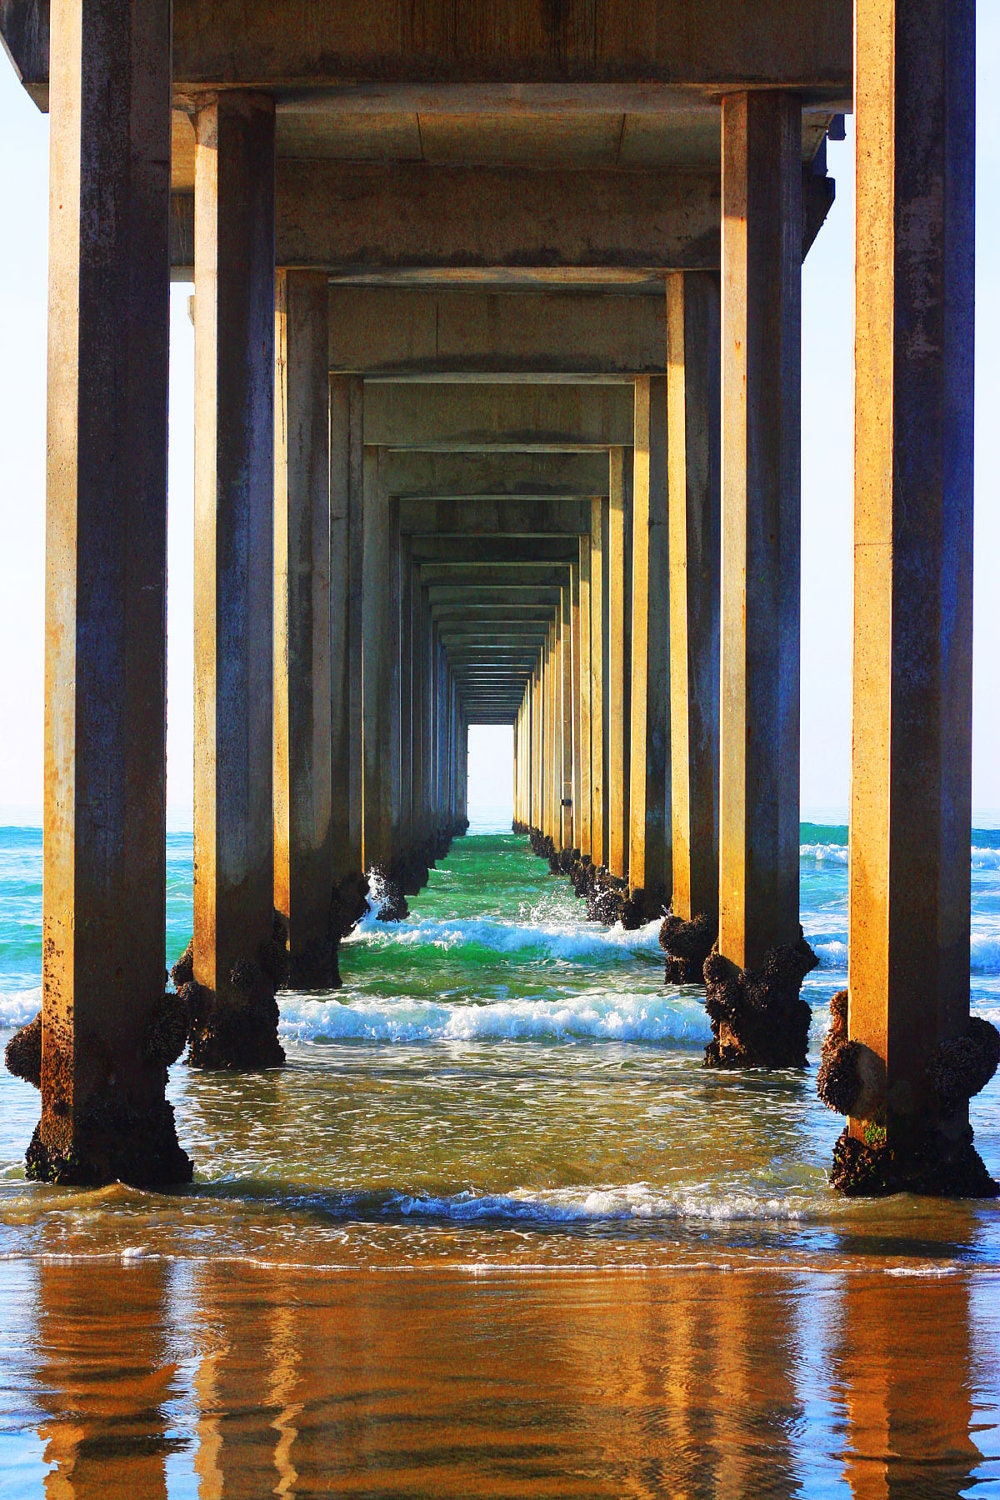 Ocean Photography Beach Prints Pier Large Photo Sea Aqua Blue, Brown Tan Vertical Wall Art Home Decor, Many sizes avail, 8x12" by Guy Taylor - NatureArtPhotography